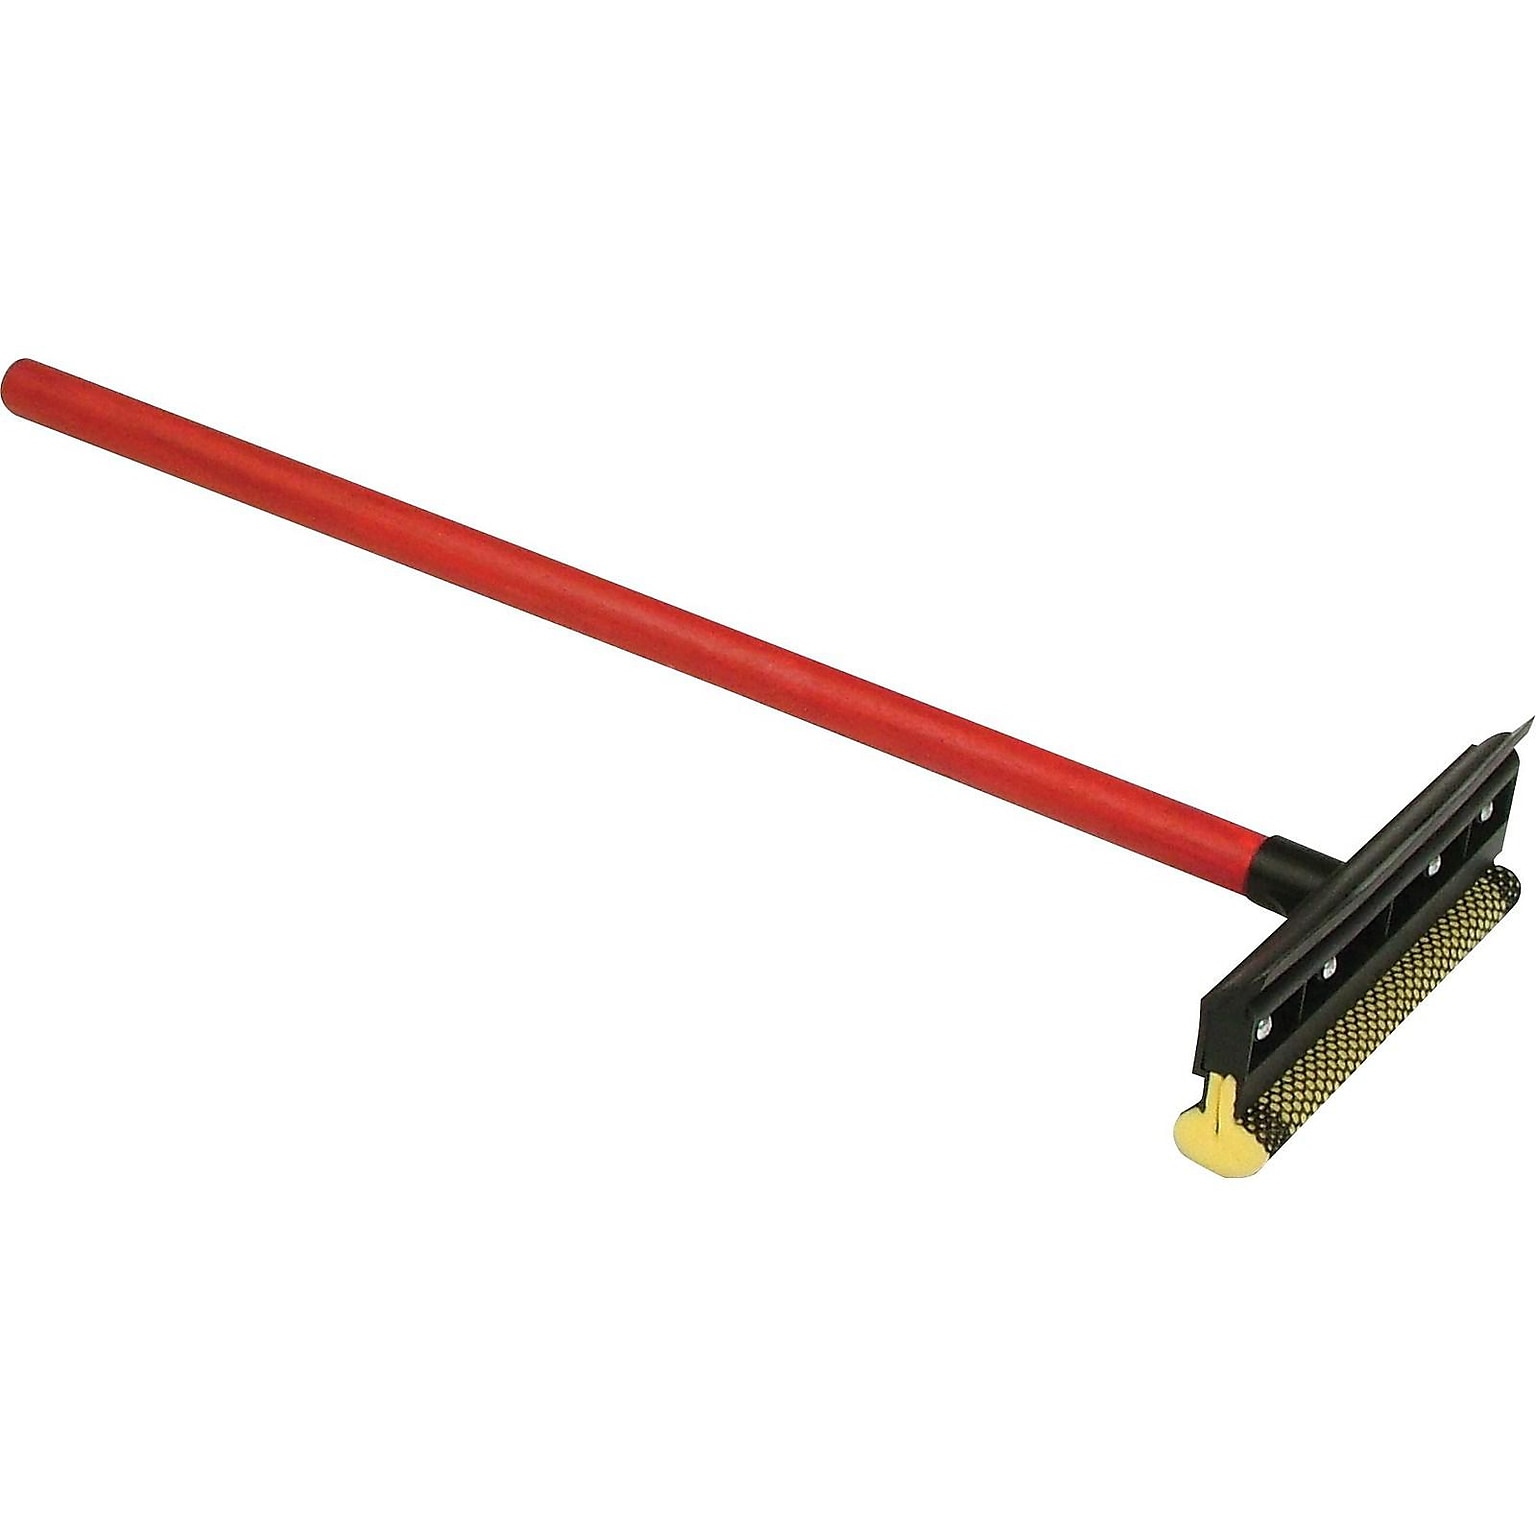 ODell 8 Window Squeegee, Red/Black (SQW-8RM)